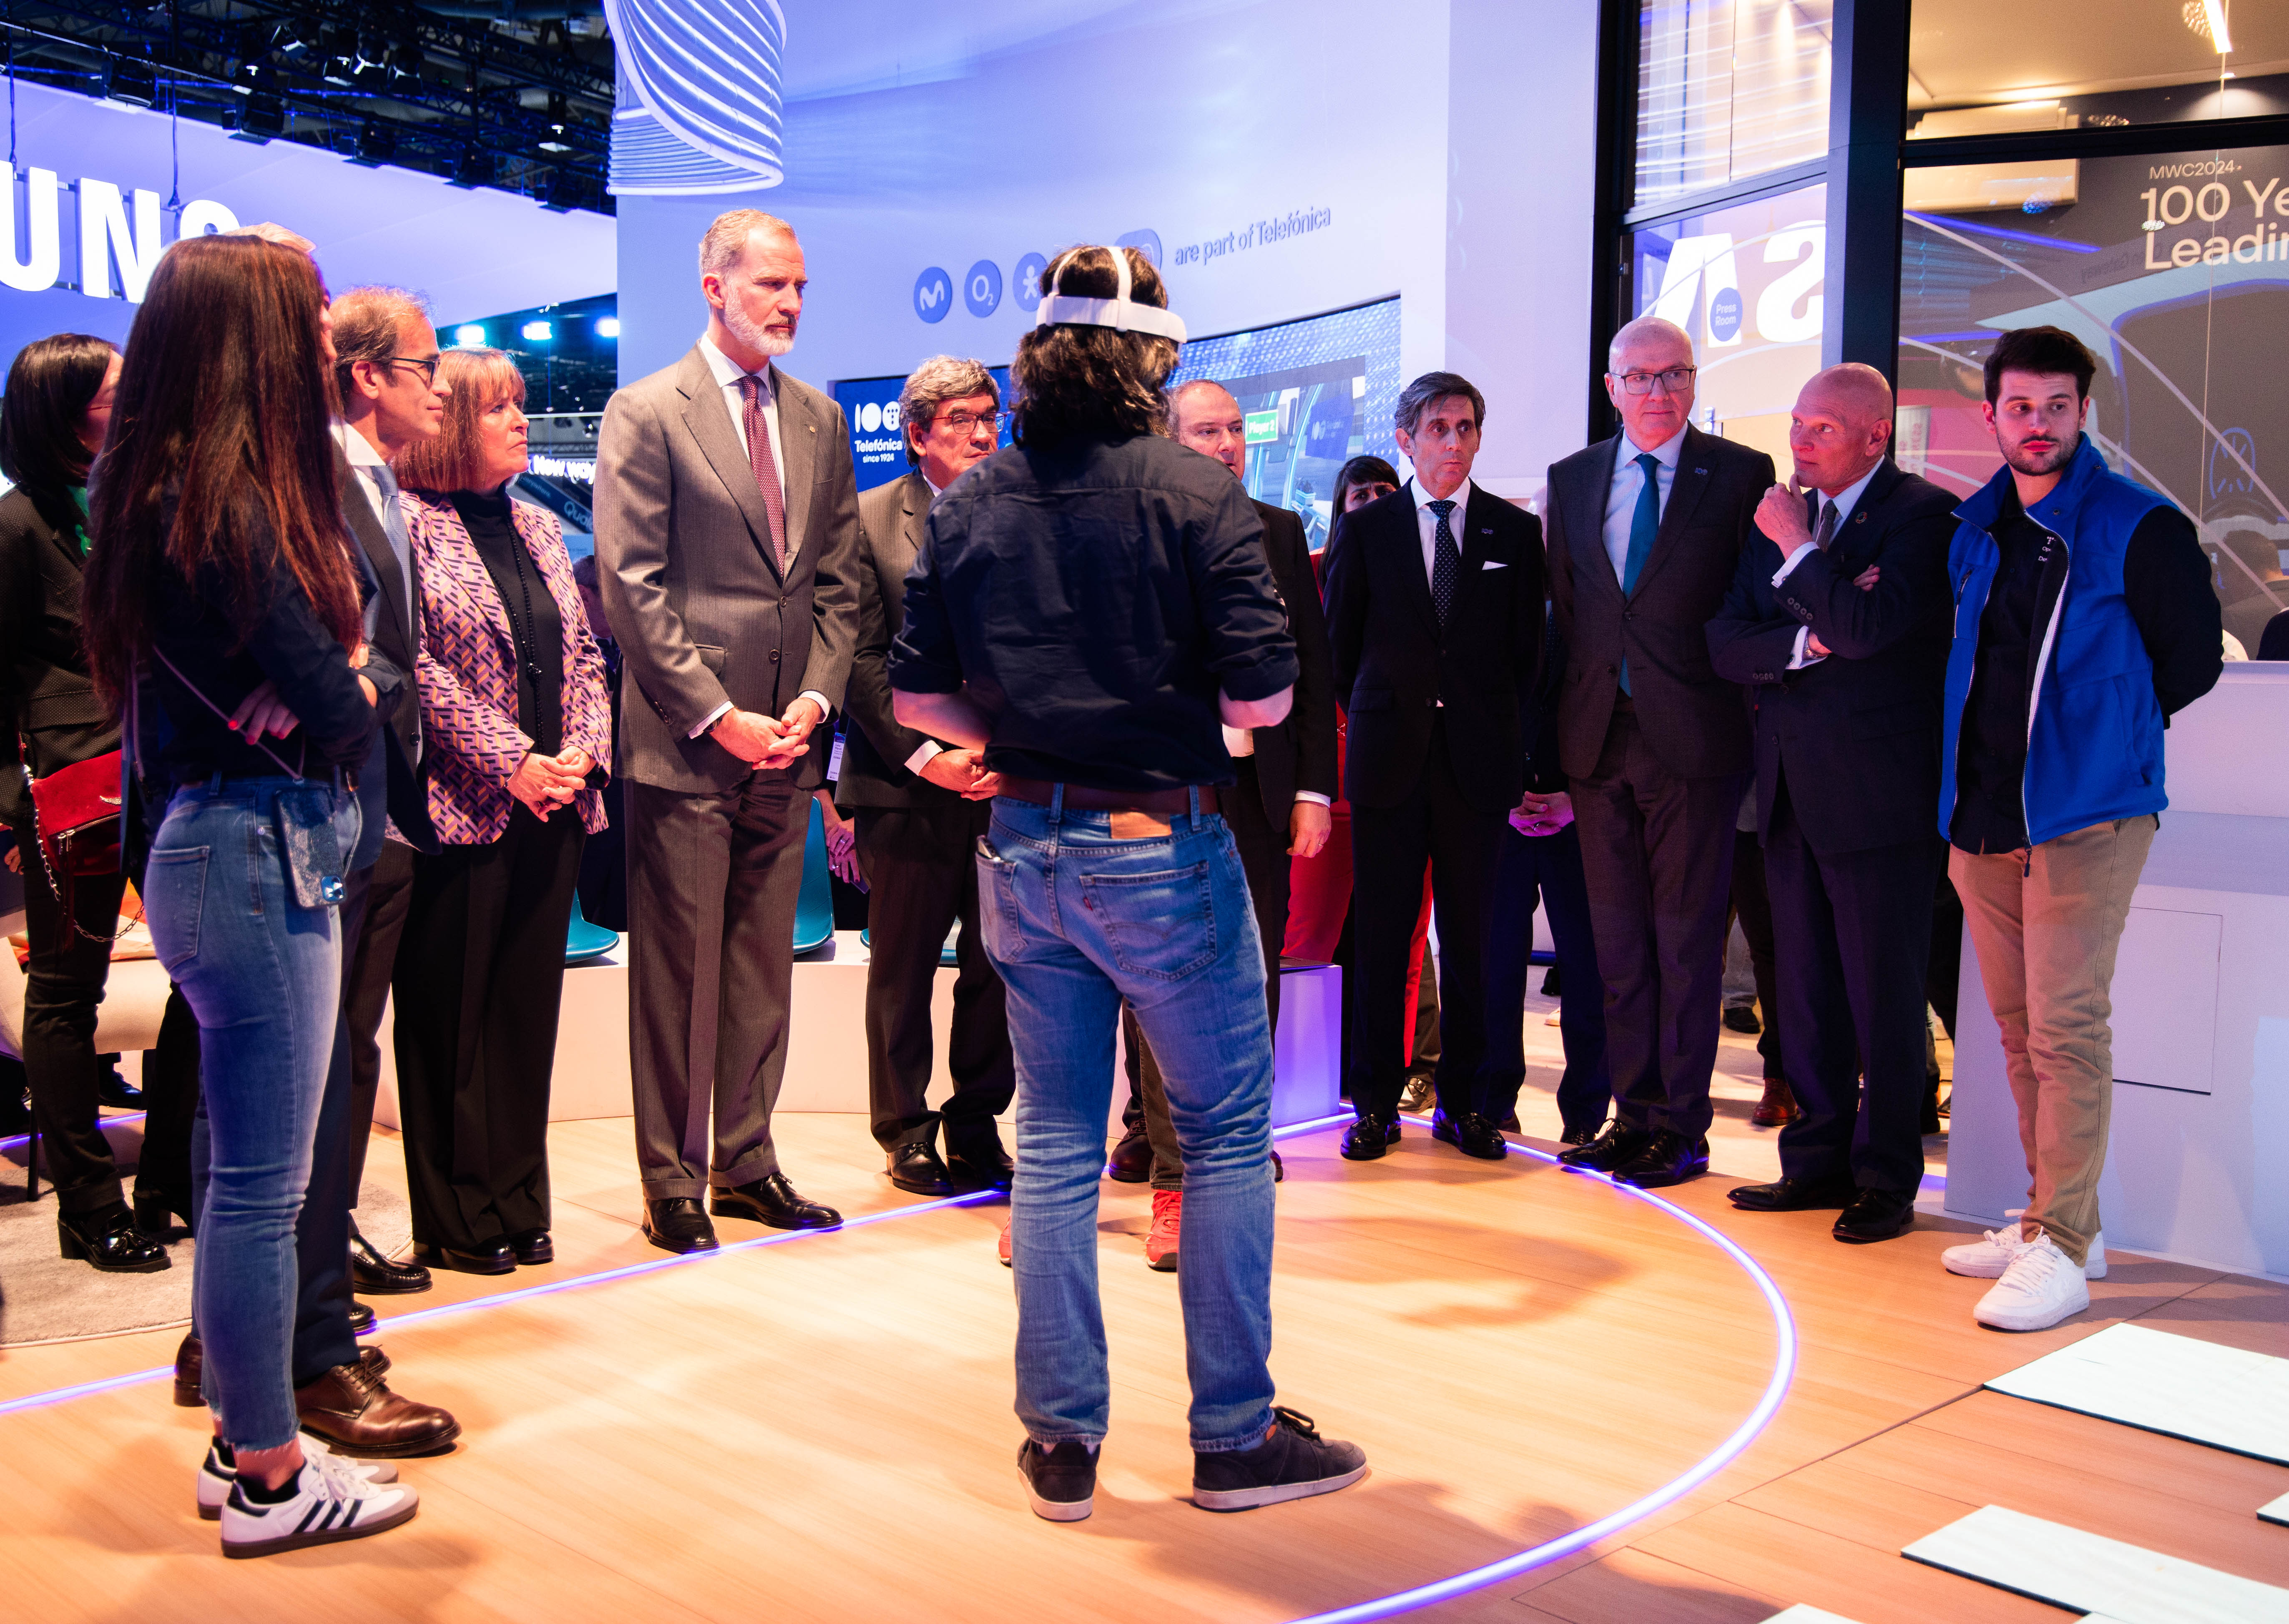 King Felipe attends a demo during his visit to the Telefónica stand at MWC 2024, accompanied by, among others, José Luis Escrivá, Minister for Digital Transformation and the Civil Service; Jordi Hereu, Minister of Industry and Tourism; Pau Relat, President of the Fira; Núría Marín, Mayor of Hospitalet; José María Álvarez-Pallete, Chairman of Telefónica and GSMA; Ángel Vilá, CEO of Telefónica; and John Hoffman, CEO of GSMA.